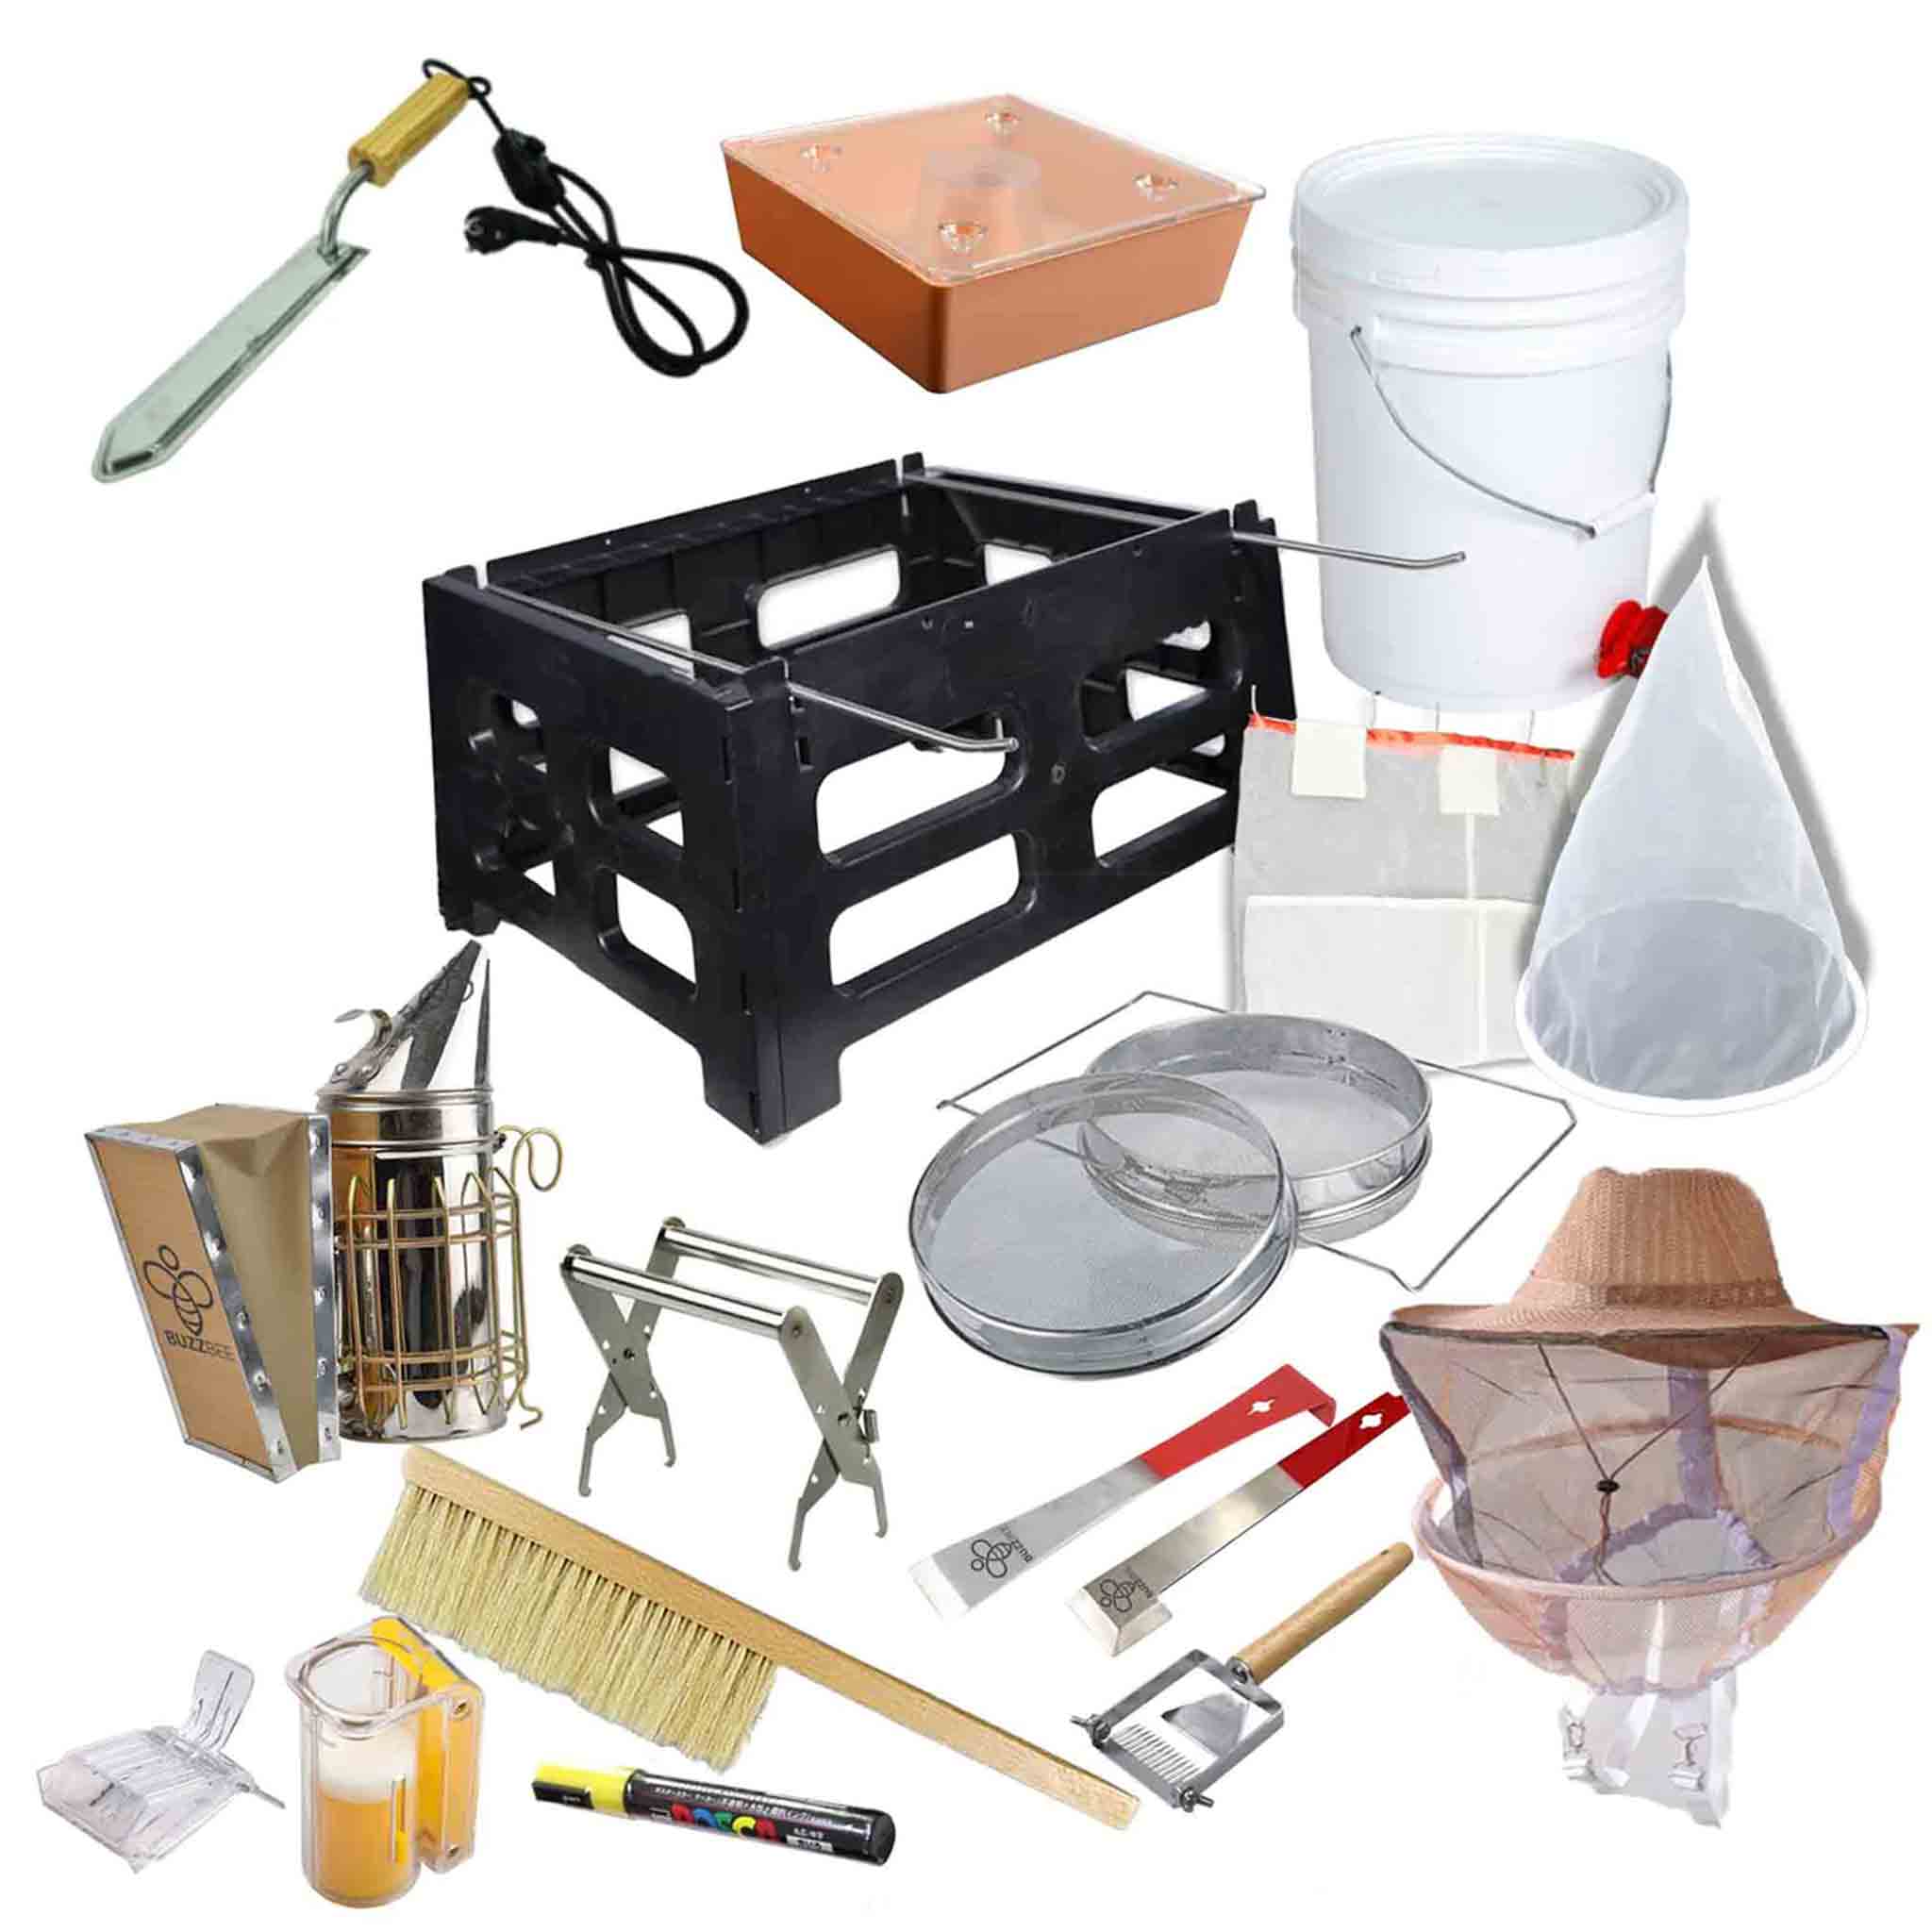 Bee Accessories & Kits - Accessories Kits collection by Buzzbee Beekeeping Supplies